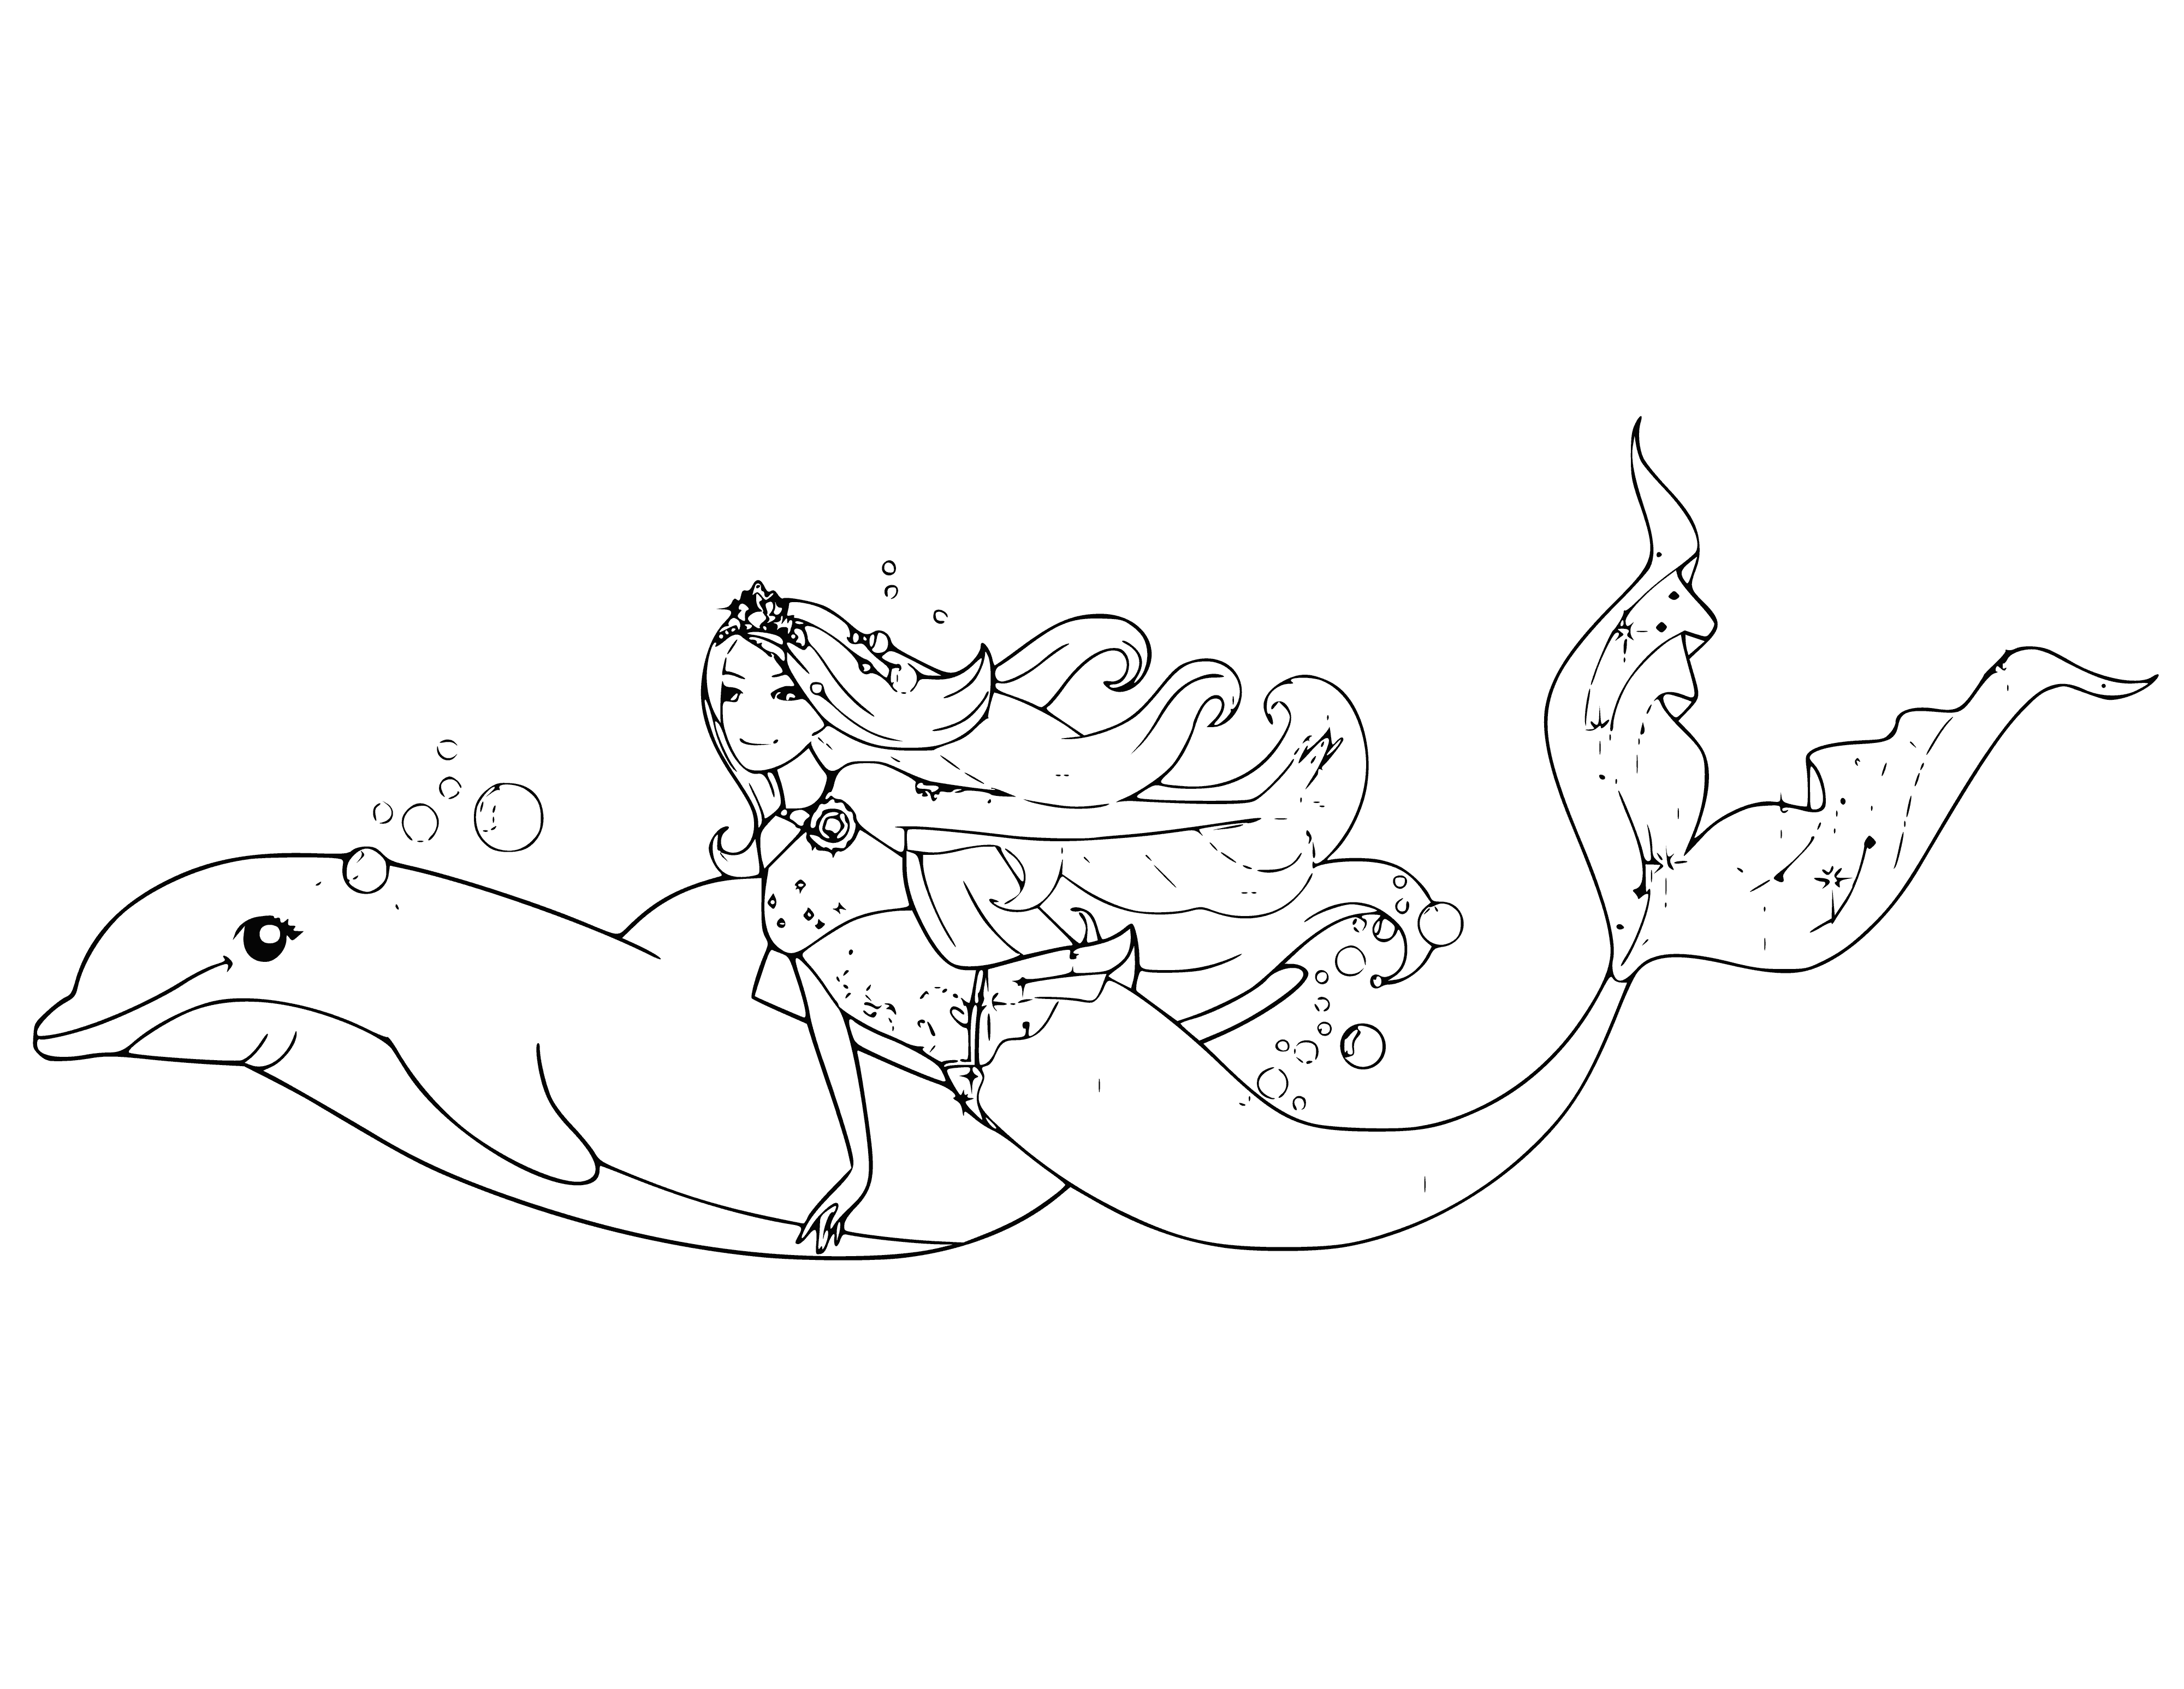 Barbie mermaid and dolphin coloring page